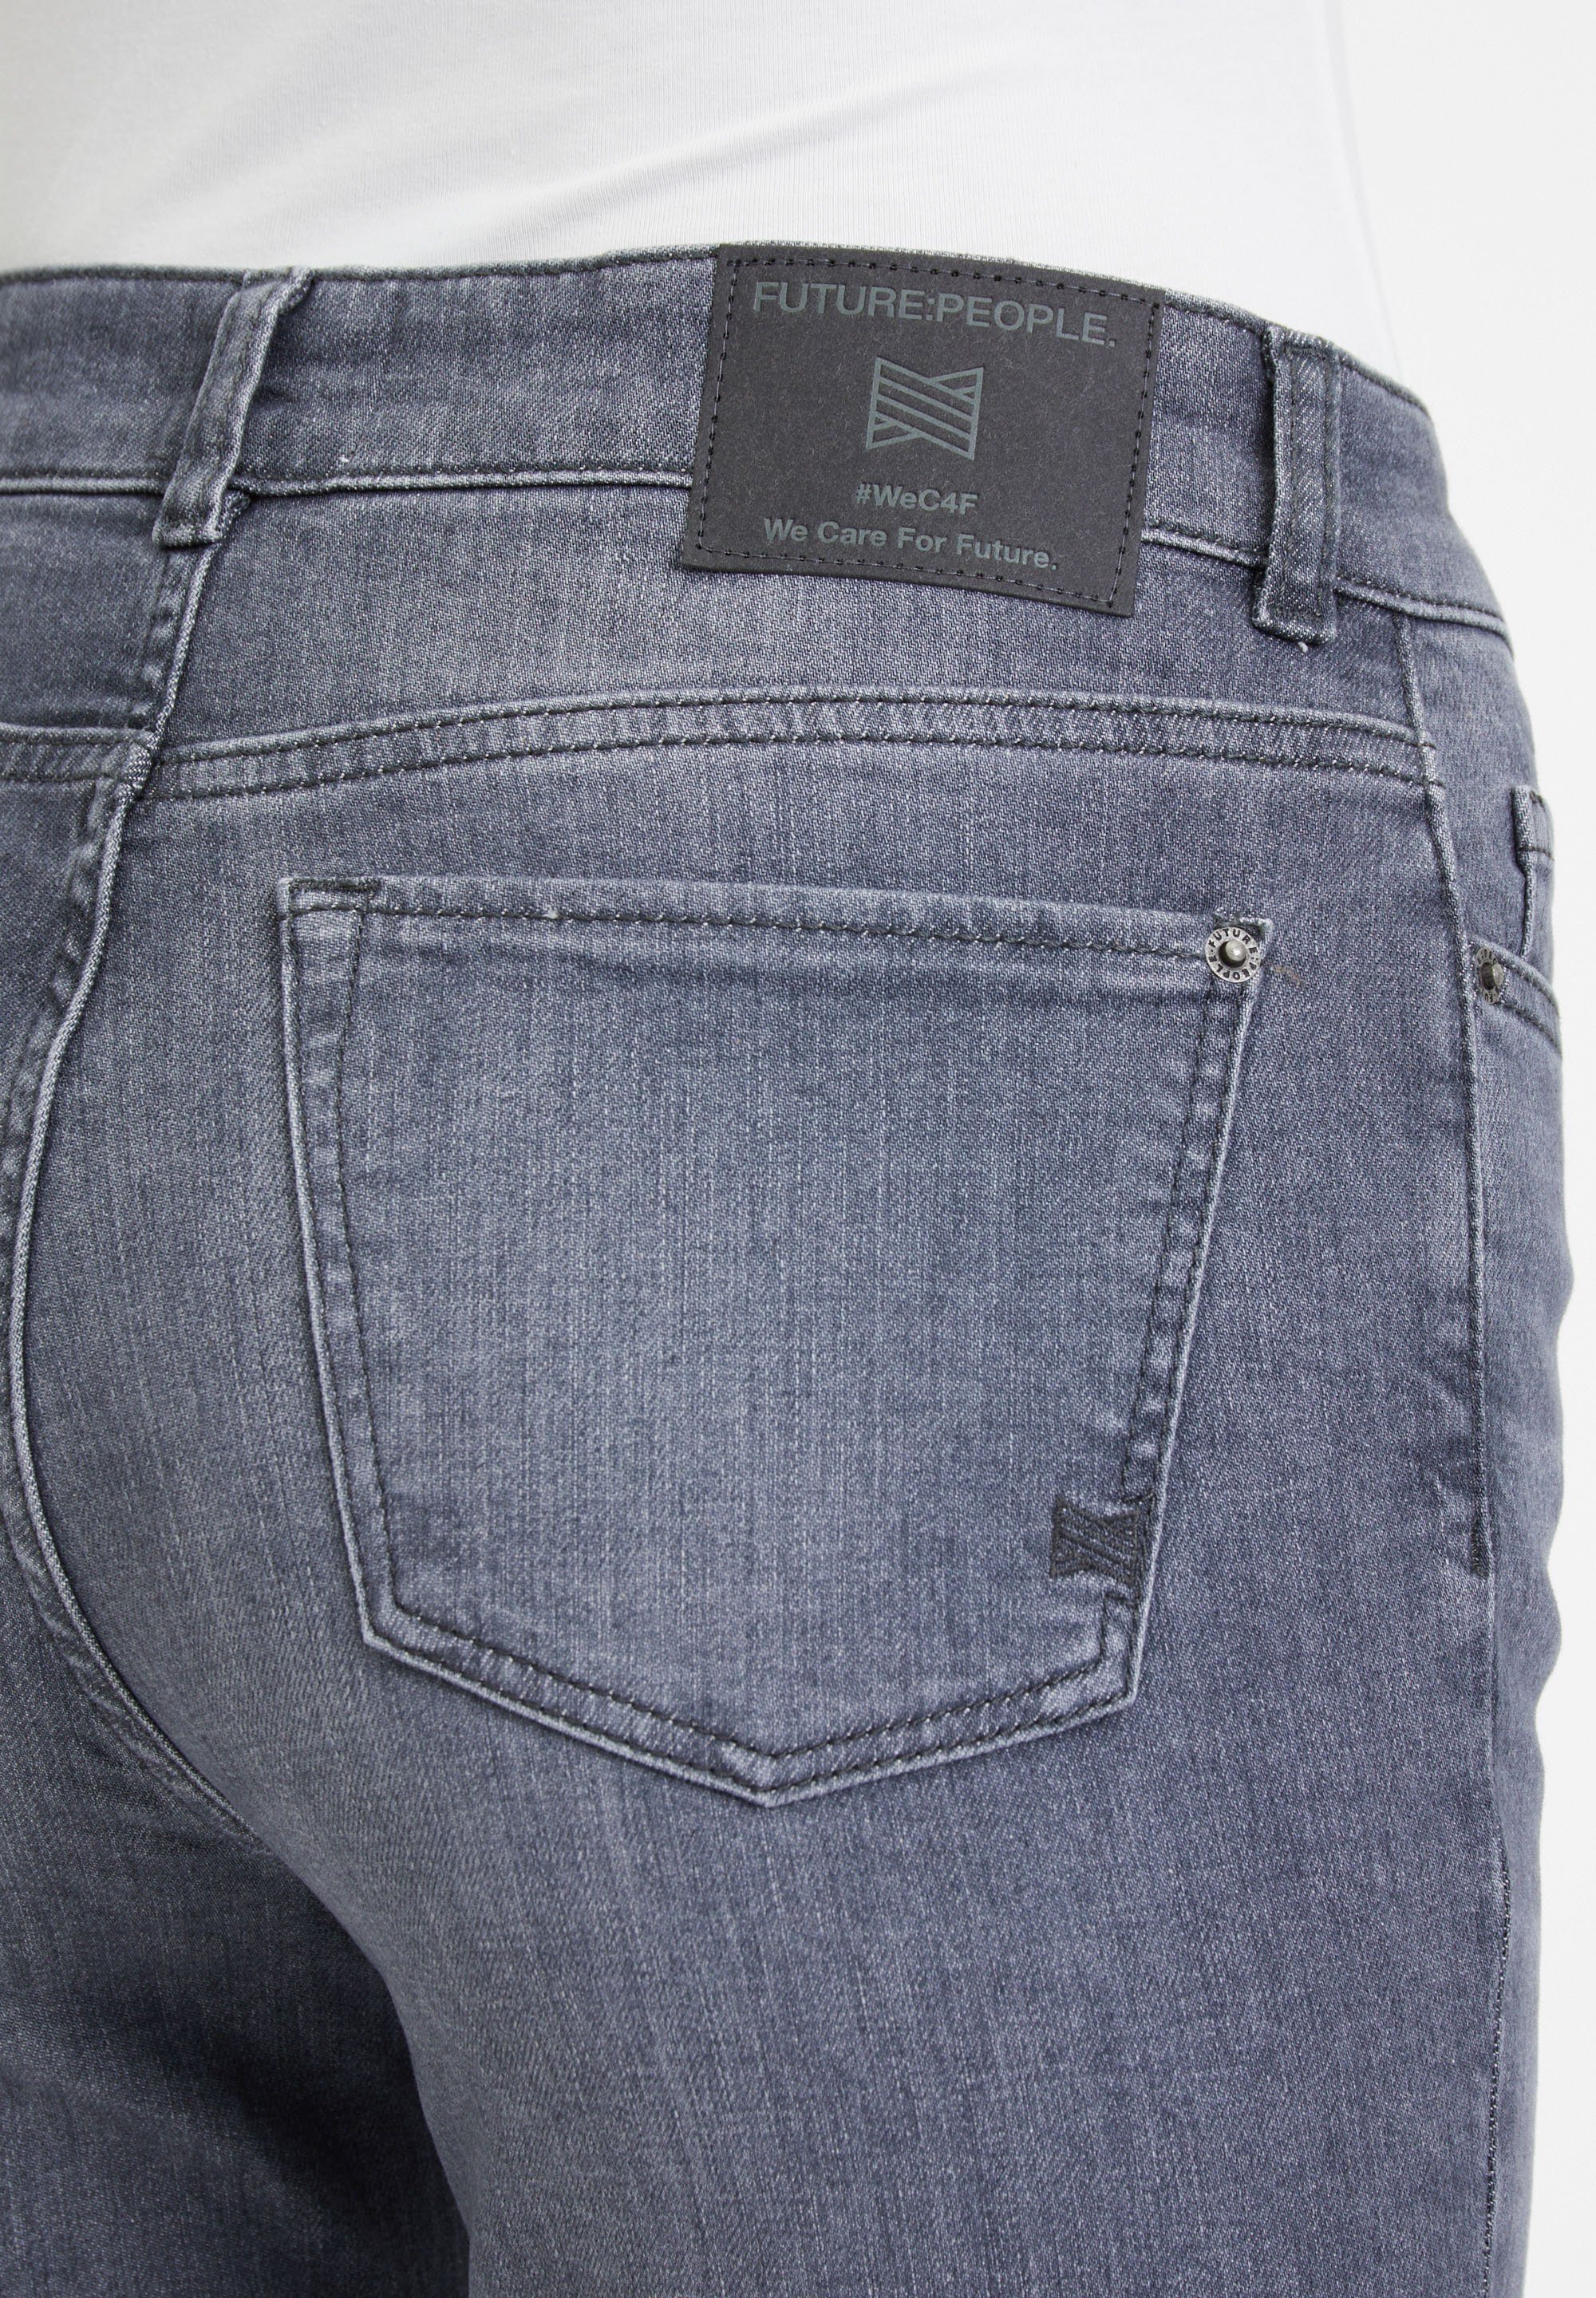 AUTHENTIC for FUTURE:PEOPLE. WAIST Care #WeC4F - - MID BOOTCUT Future. 01:02 USED GREY We Slim-fit-Jeans